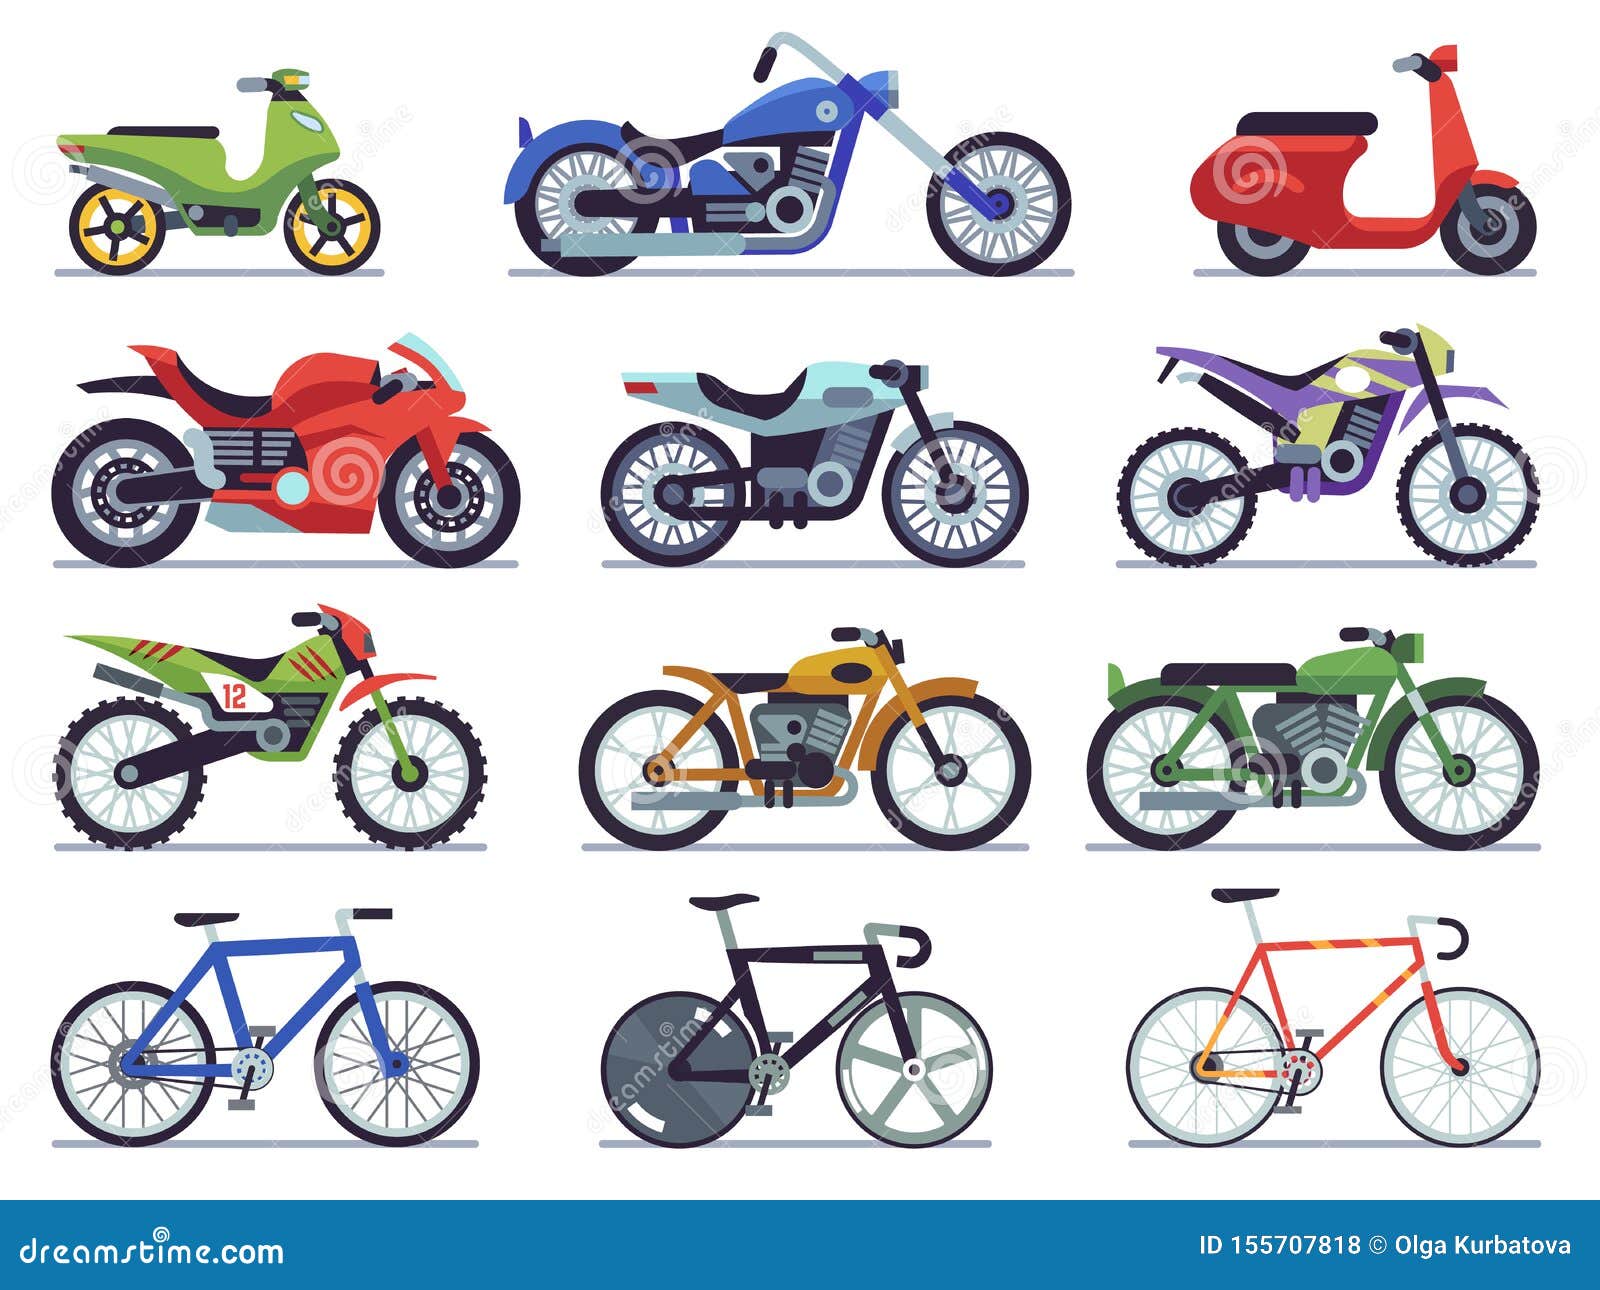 motorcycle set. motorbike and scooter, sport bike and chopper. motocross race and delivery vehicles side view 